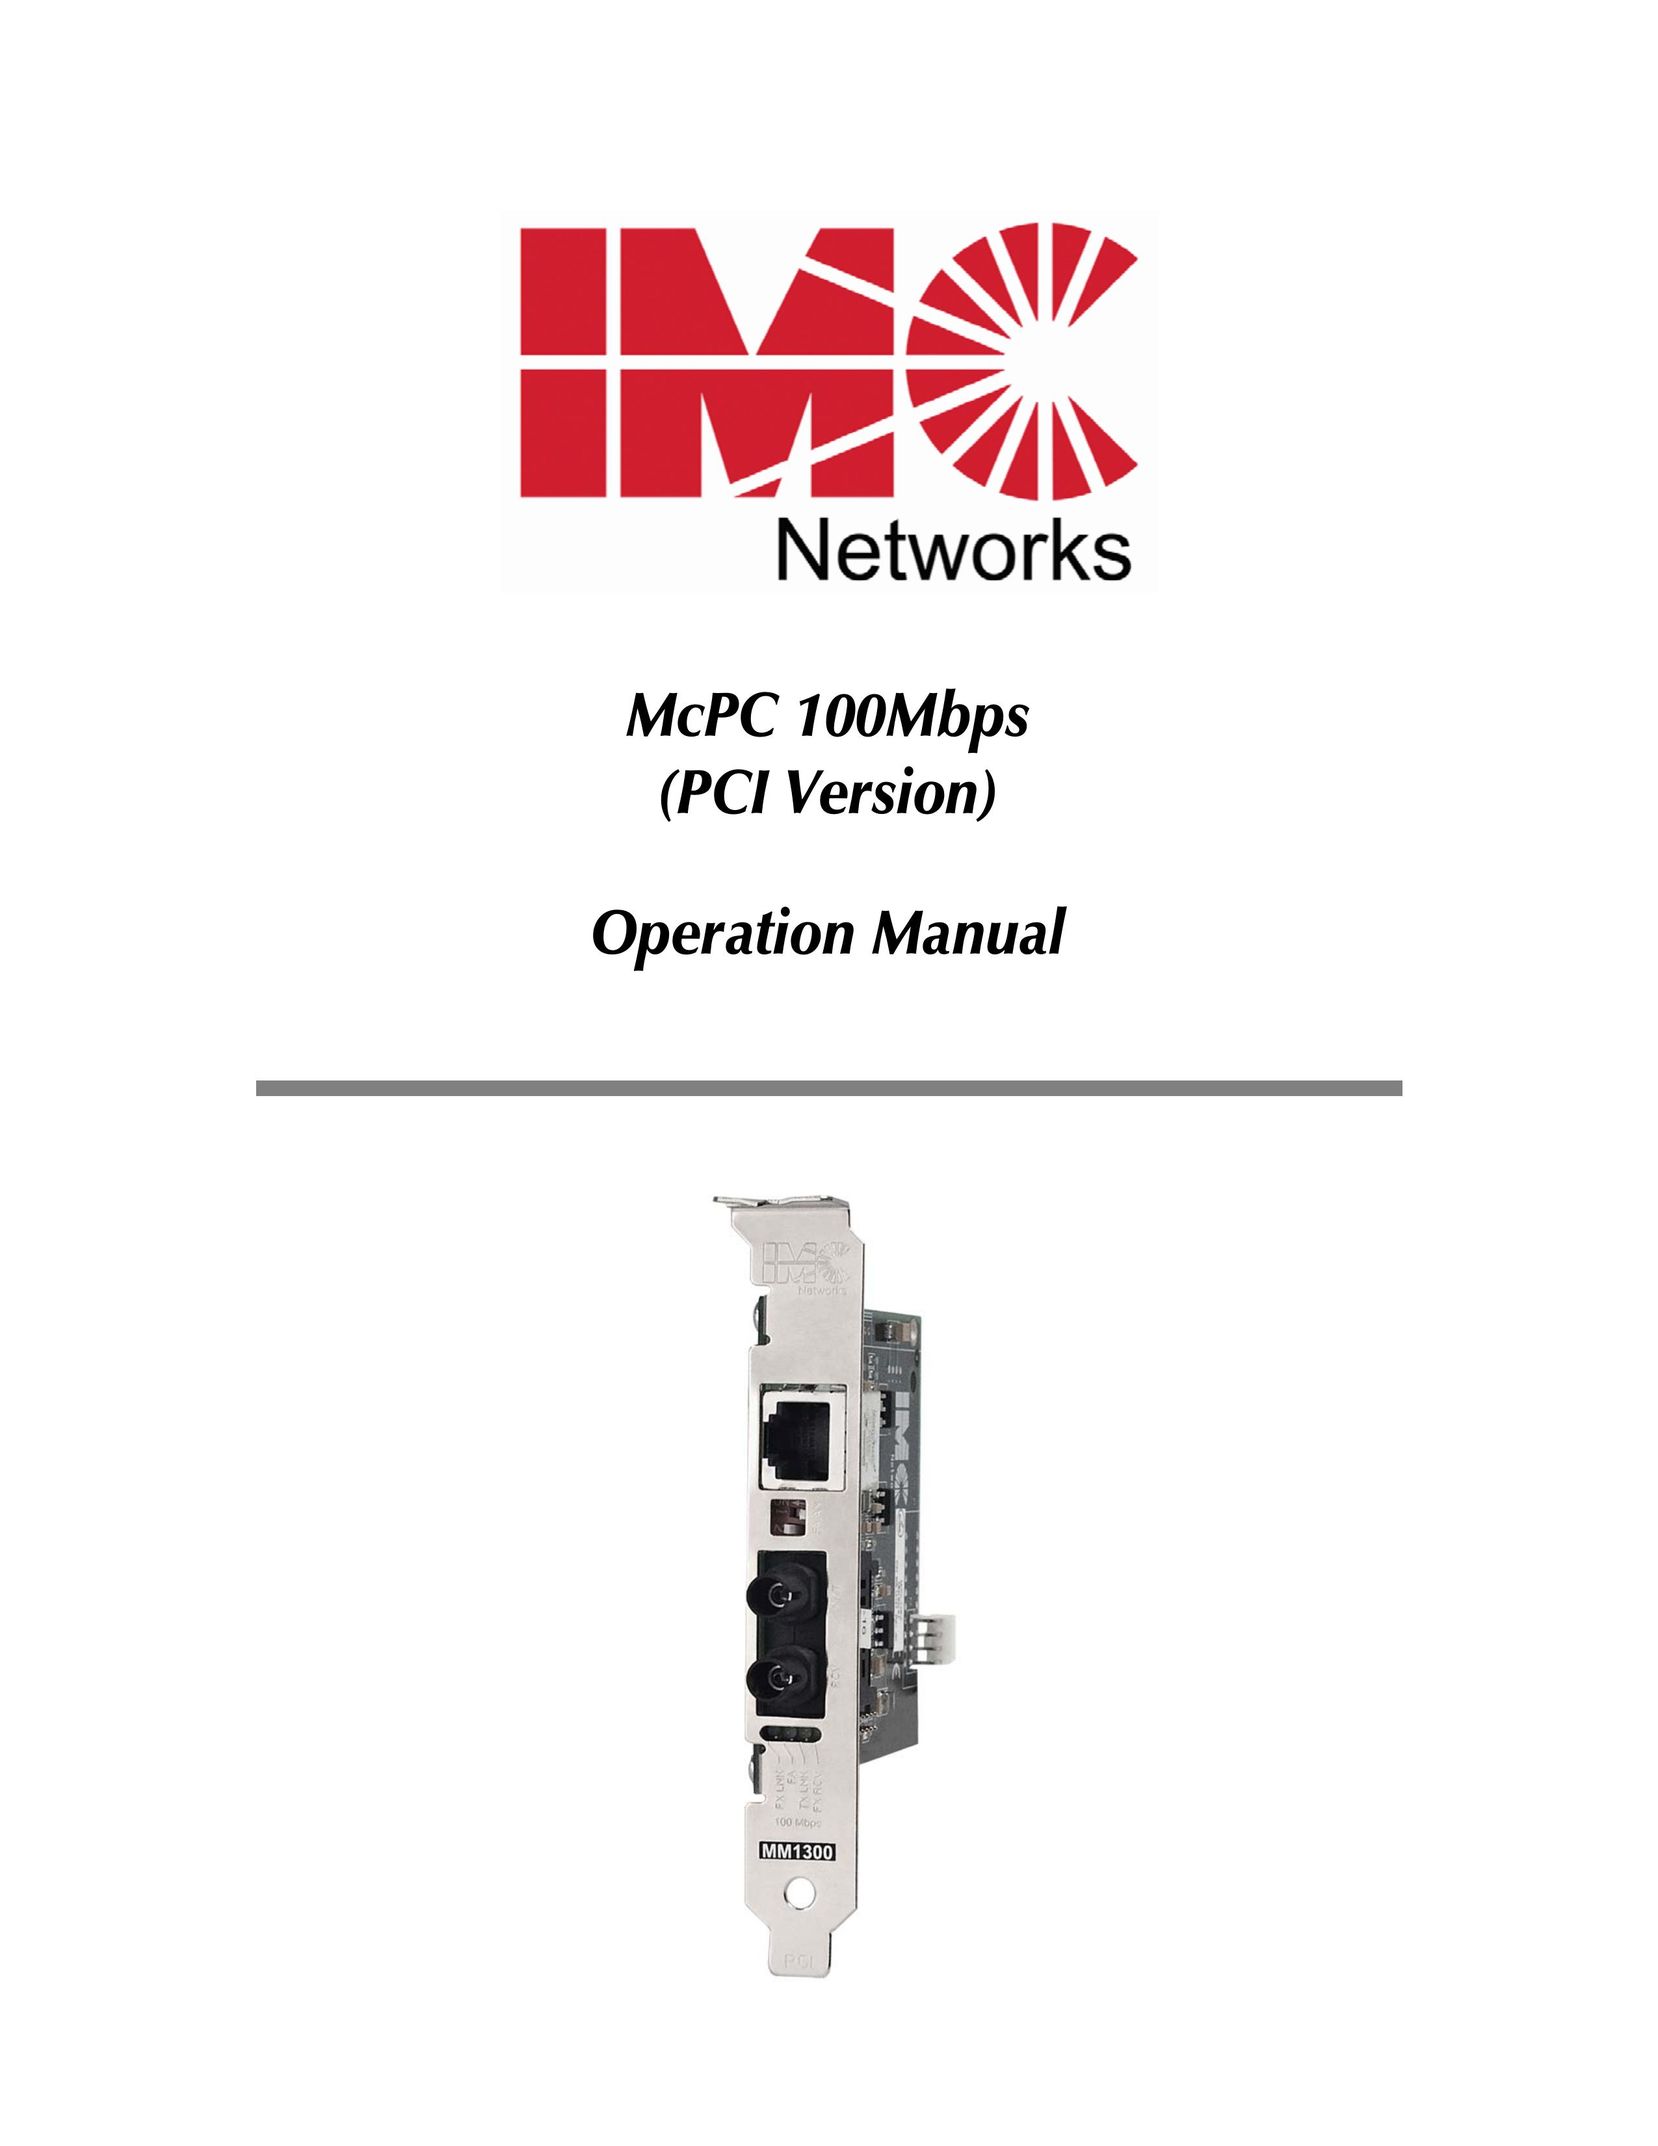 IMC Networks McPC 100 Mbps Computer Hardware User Manual